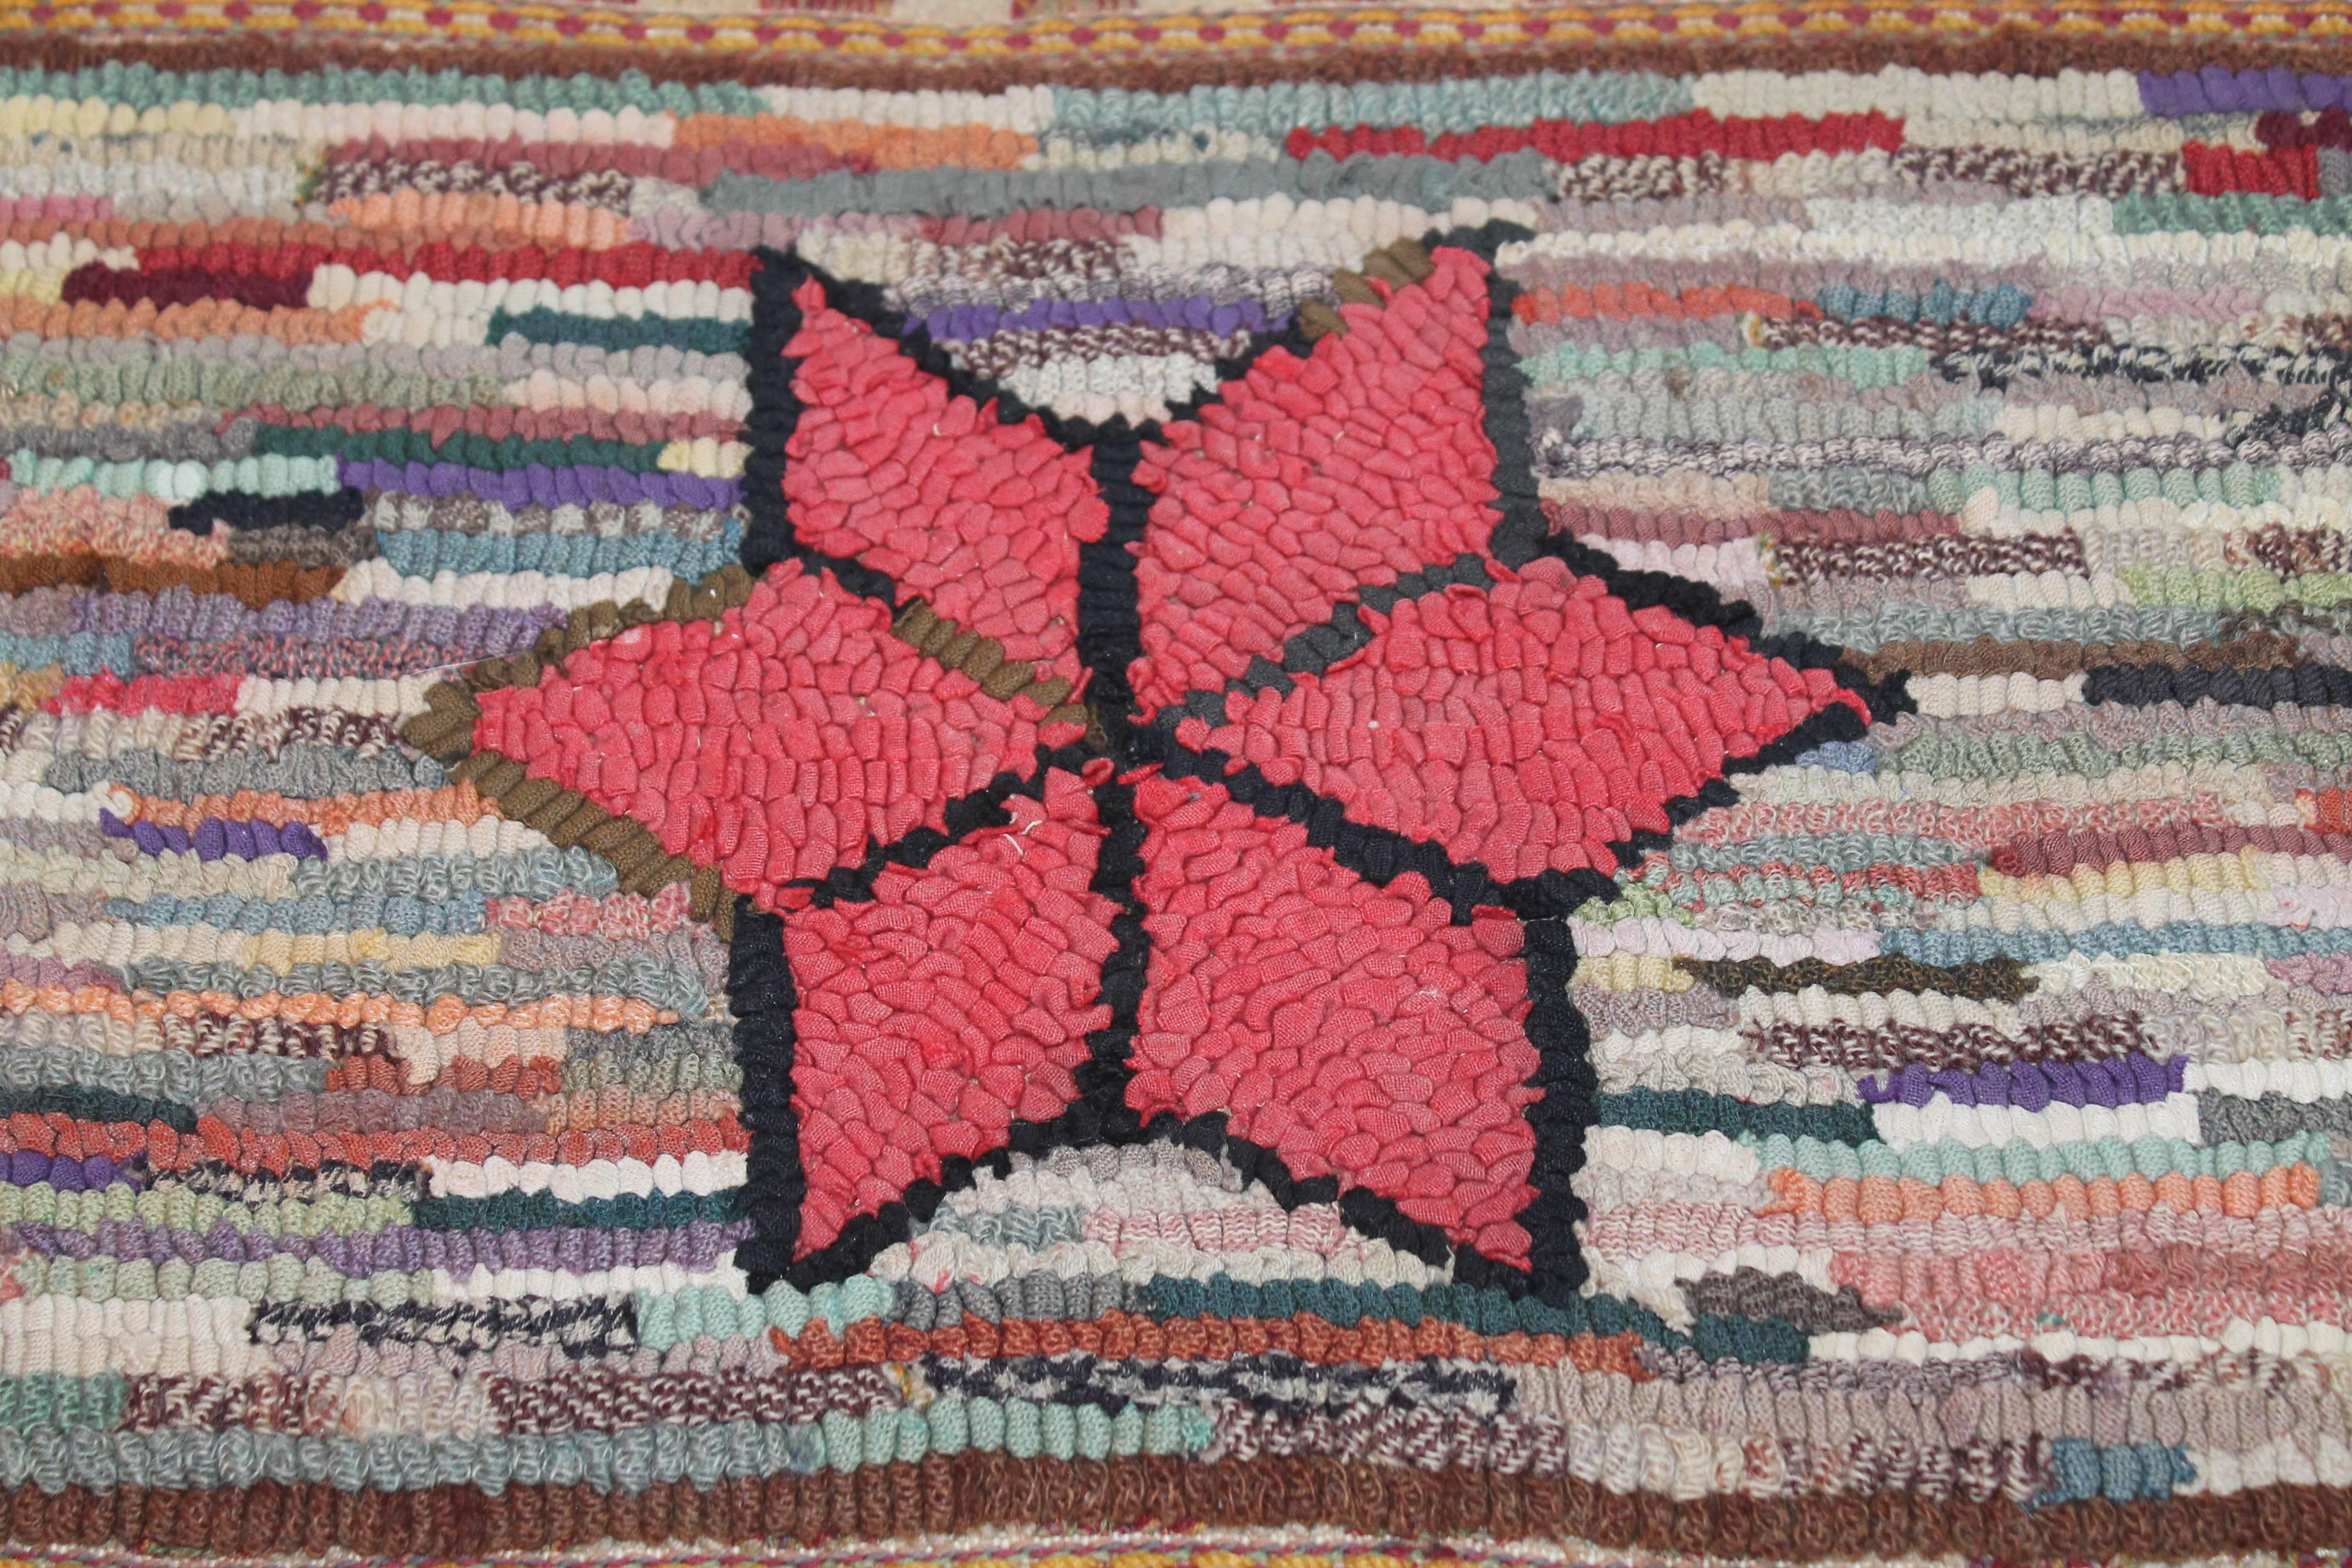 This amazing little gem is very early example of a sampler or child's hand hooked rug mounted on stretcher frame. The entire rug including the fringe is hand woven in very early country colors. It is all hand-sewn on cotton linen.